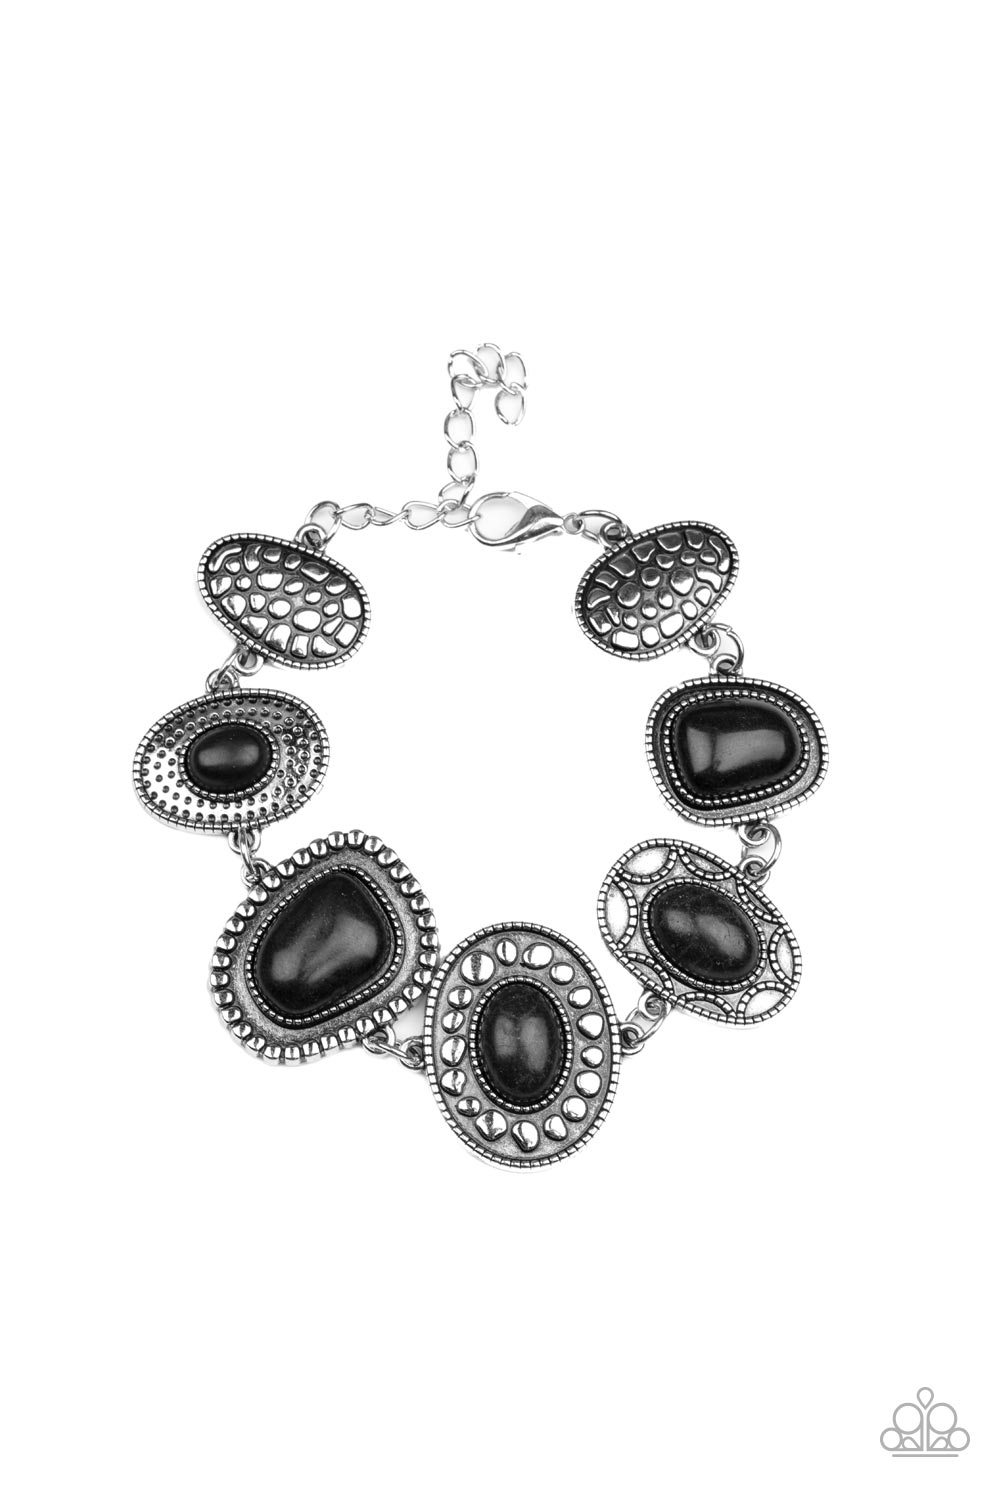 Taos Trendsetter - Black Stone and Silver Bracelet - Paparazzi Accessories - An earthy collection of irregular-shaped black stones are each pressed into distinctive antiqued silver frames. Each frame showcases a unique pattern of studded and dotted texture resulting in an artisanal vintage vibe as it falls around the wrist.